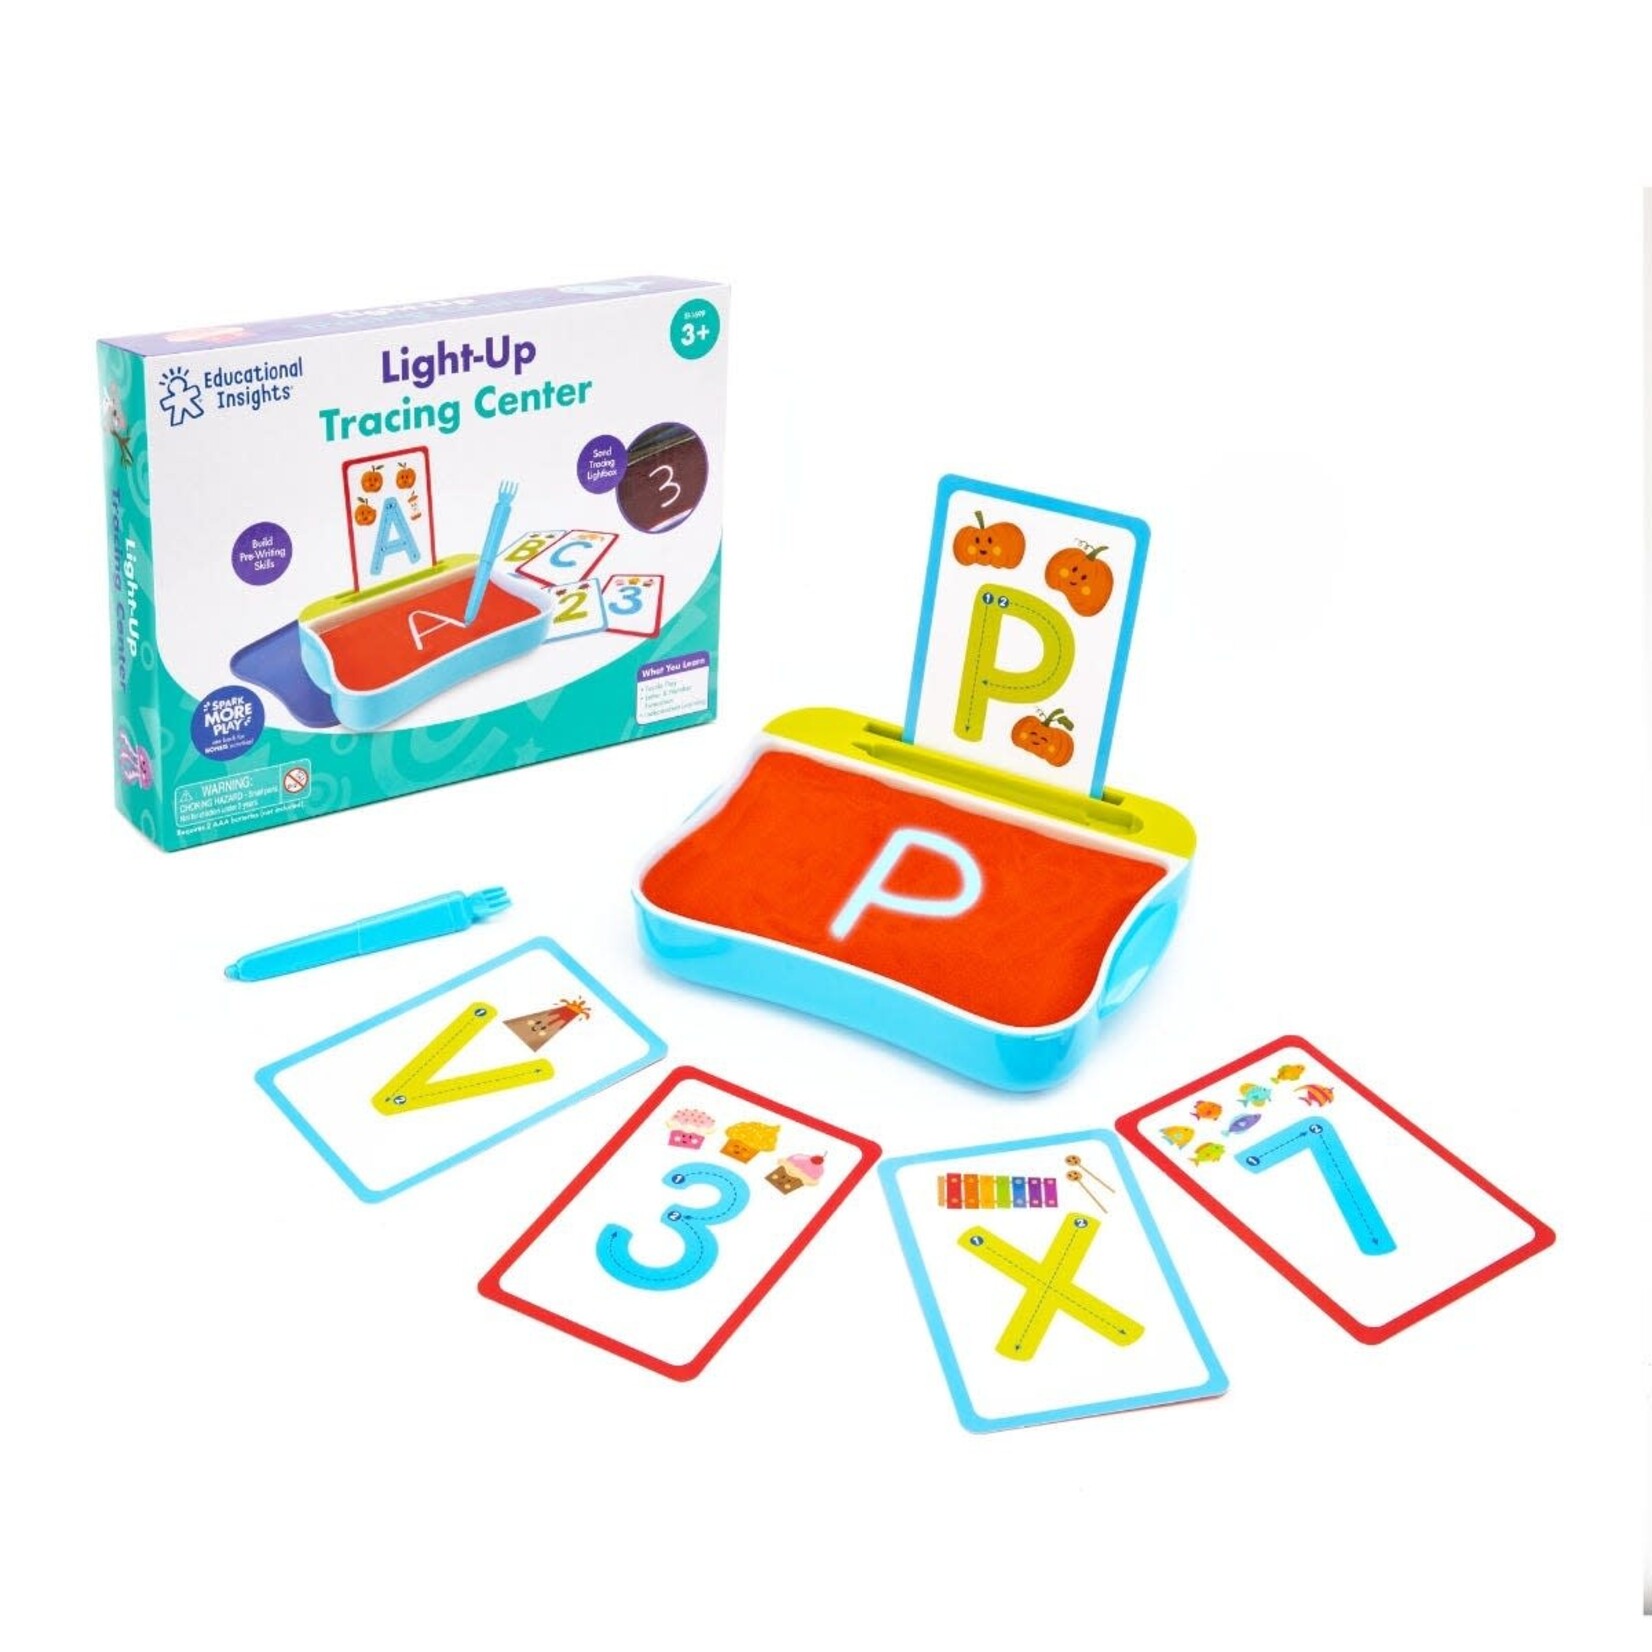 EDUCATIONAL INSIGHTS INC Light-Up Tracing Center